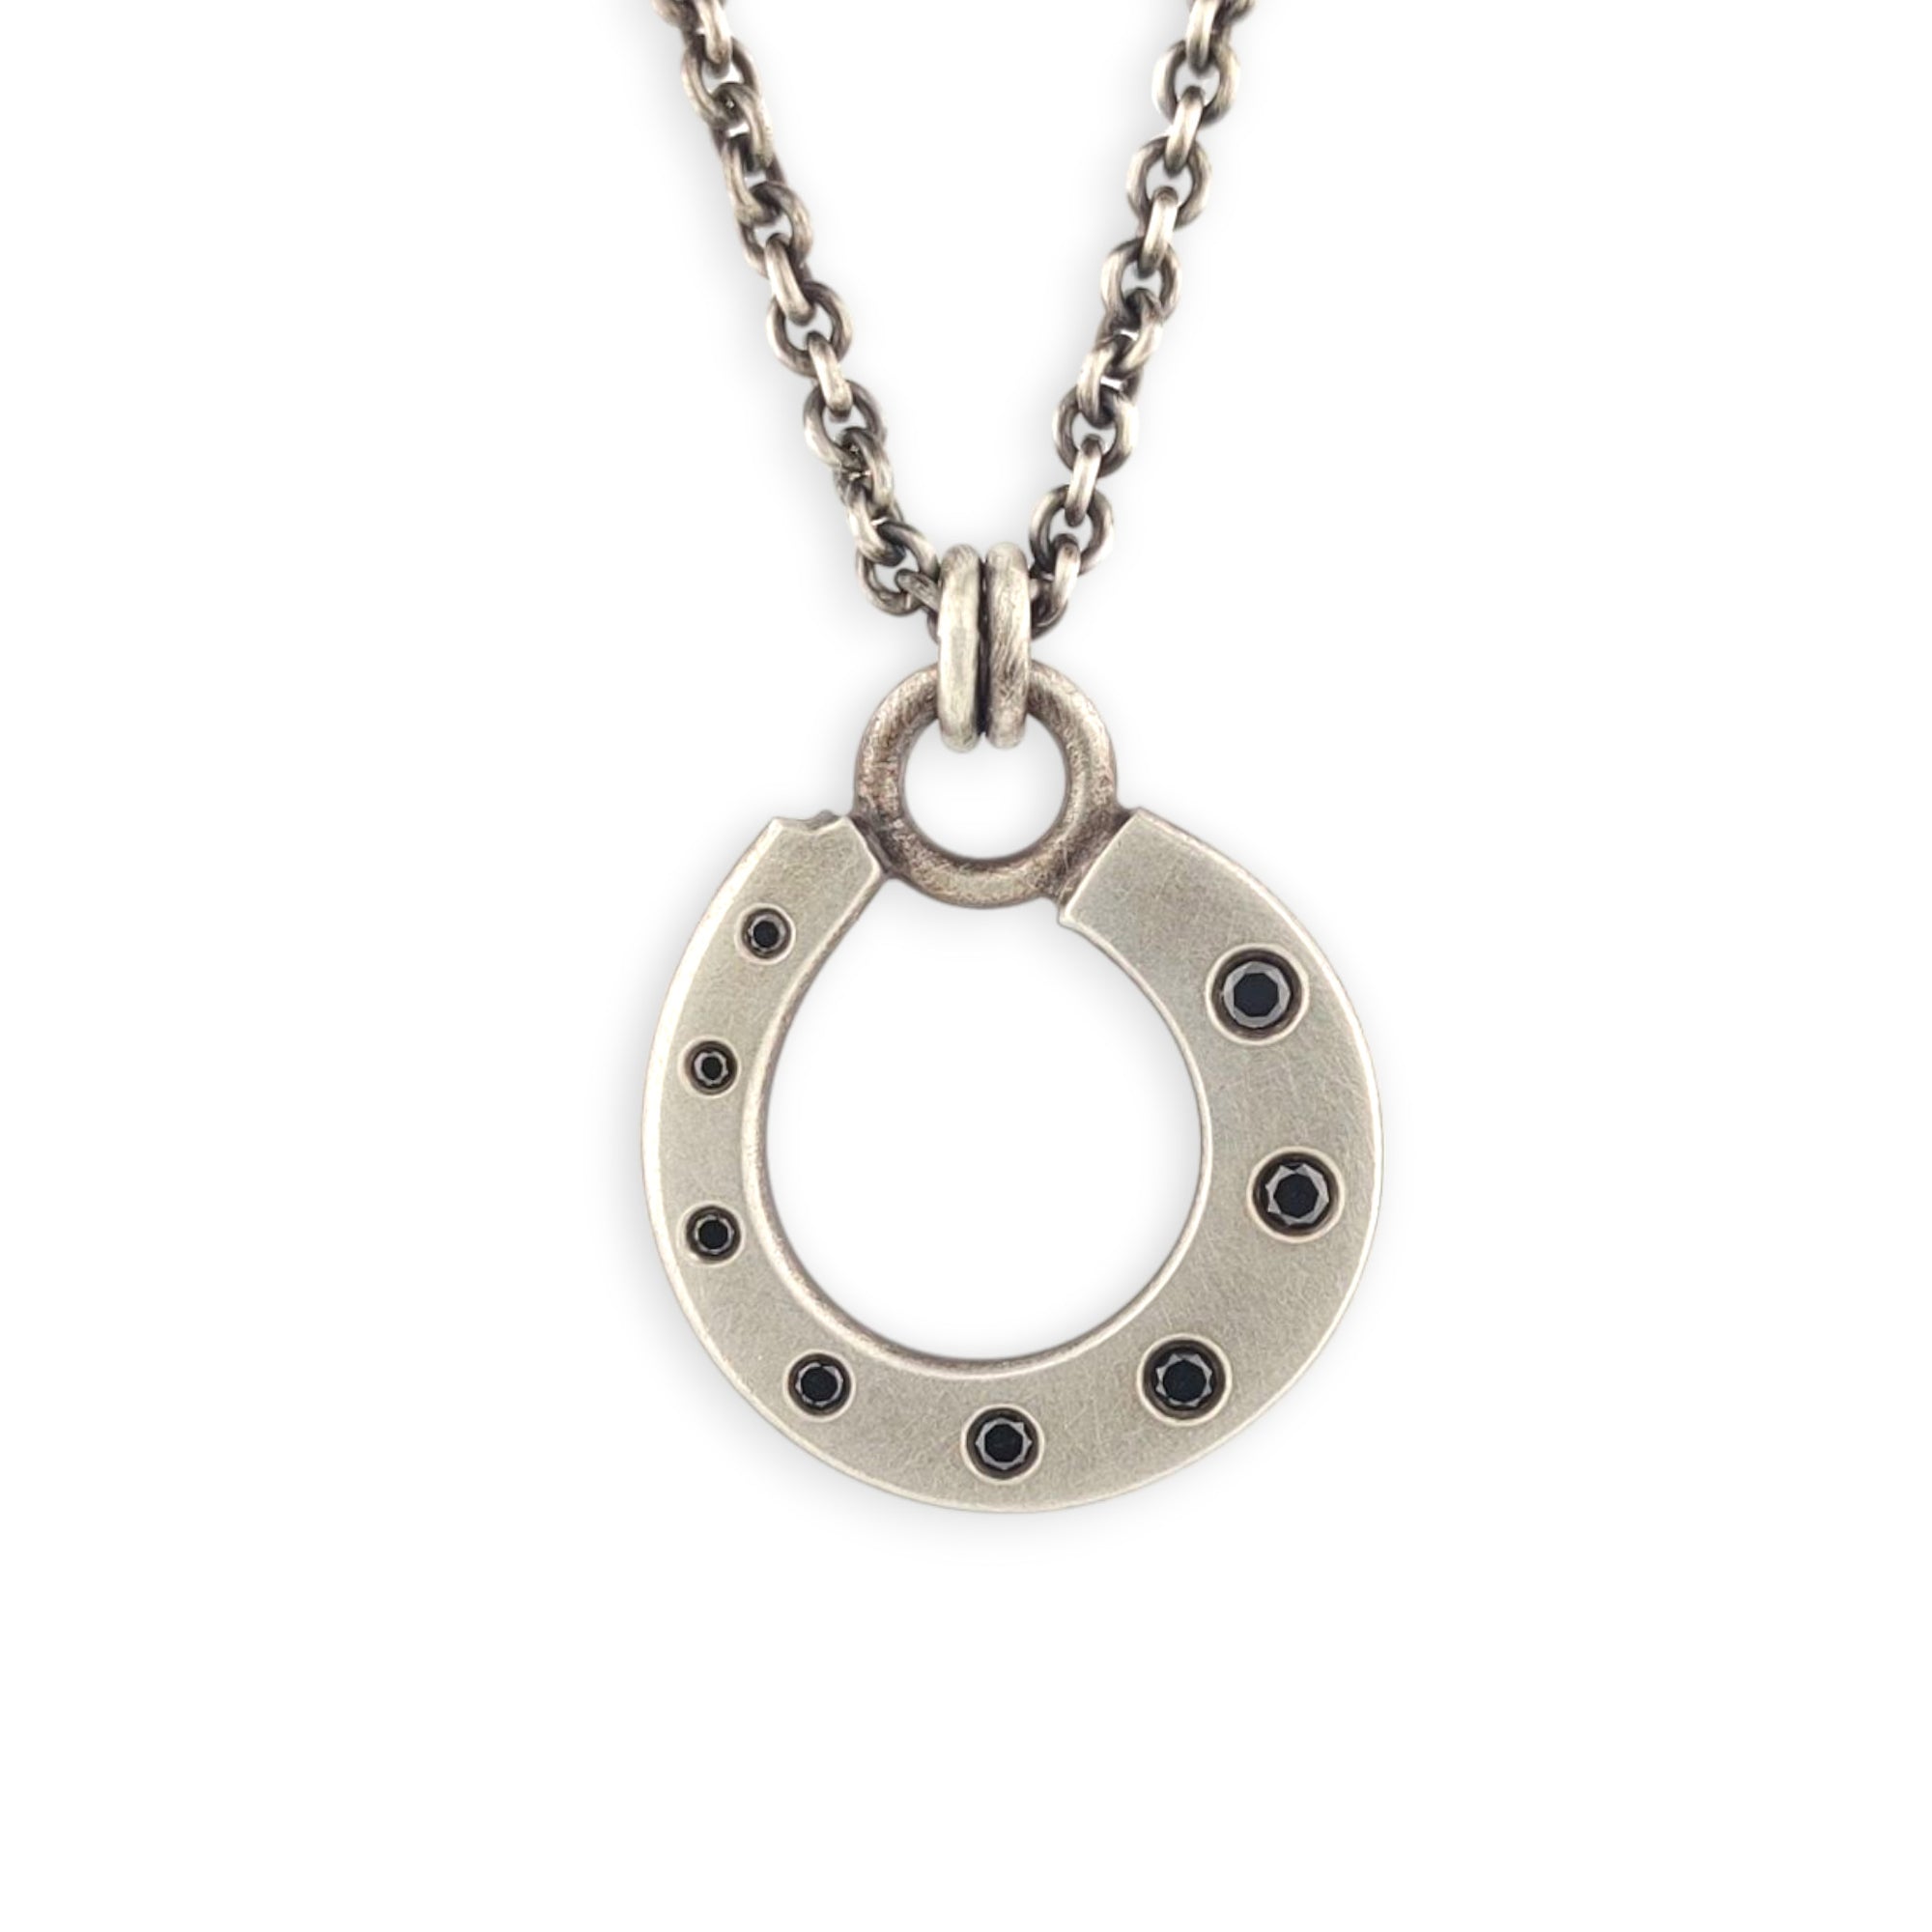 Forged Sterling Silver Pendant with Black Diamonds